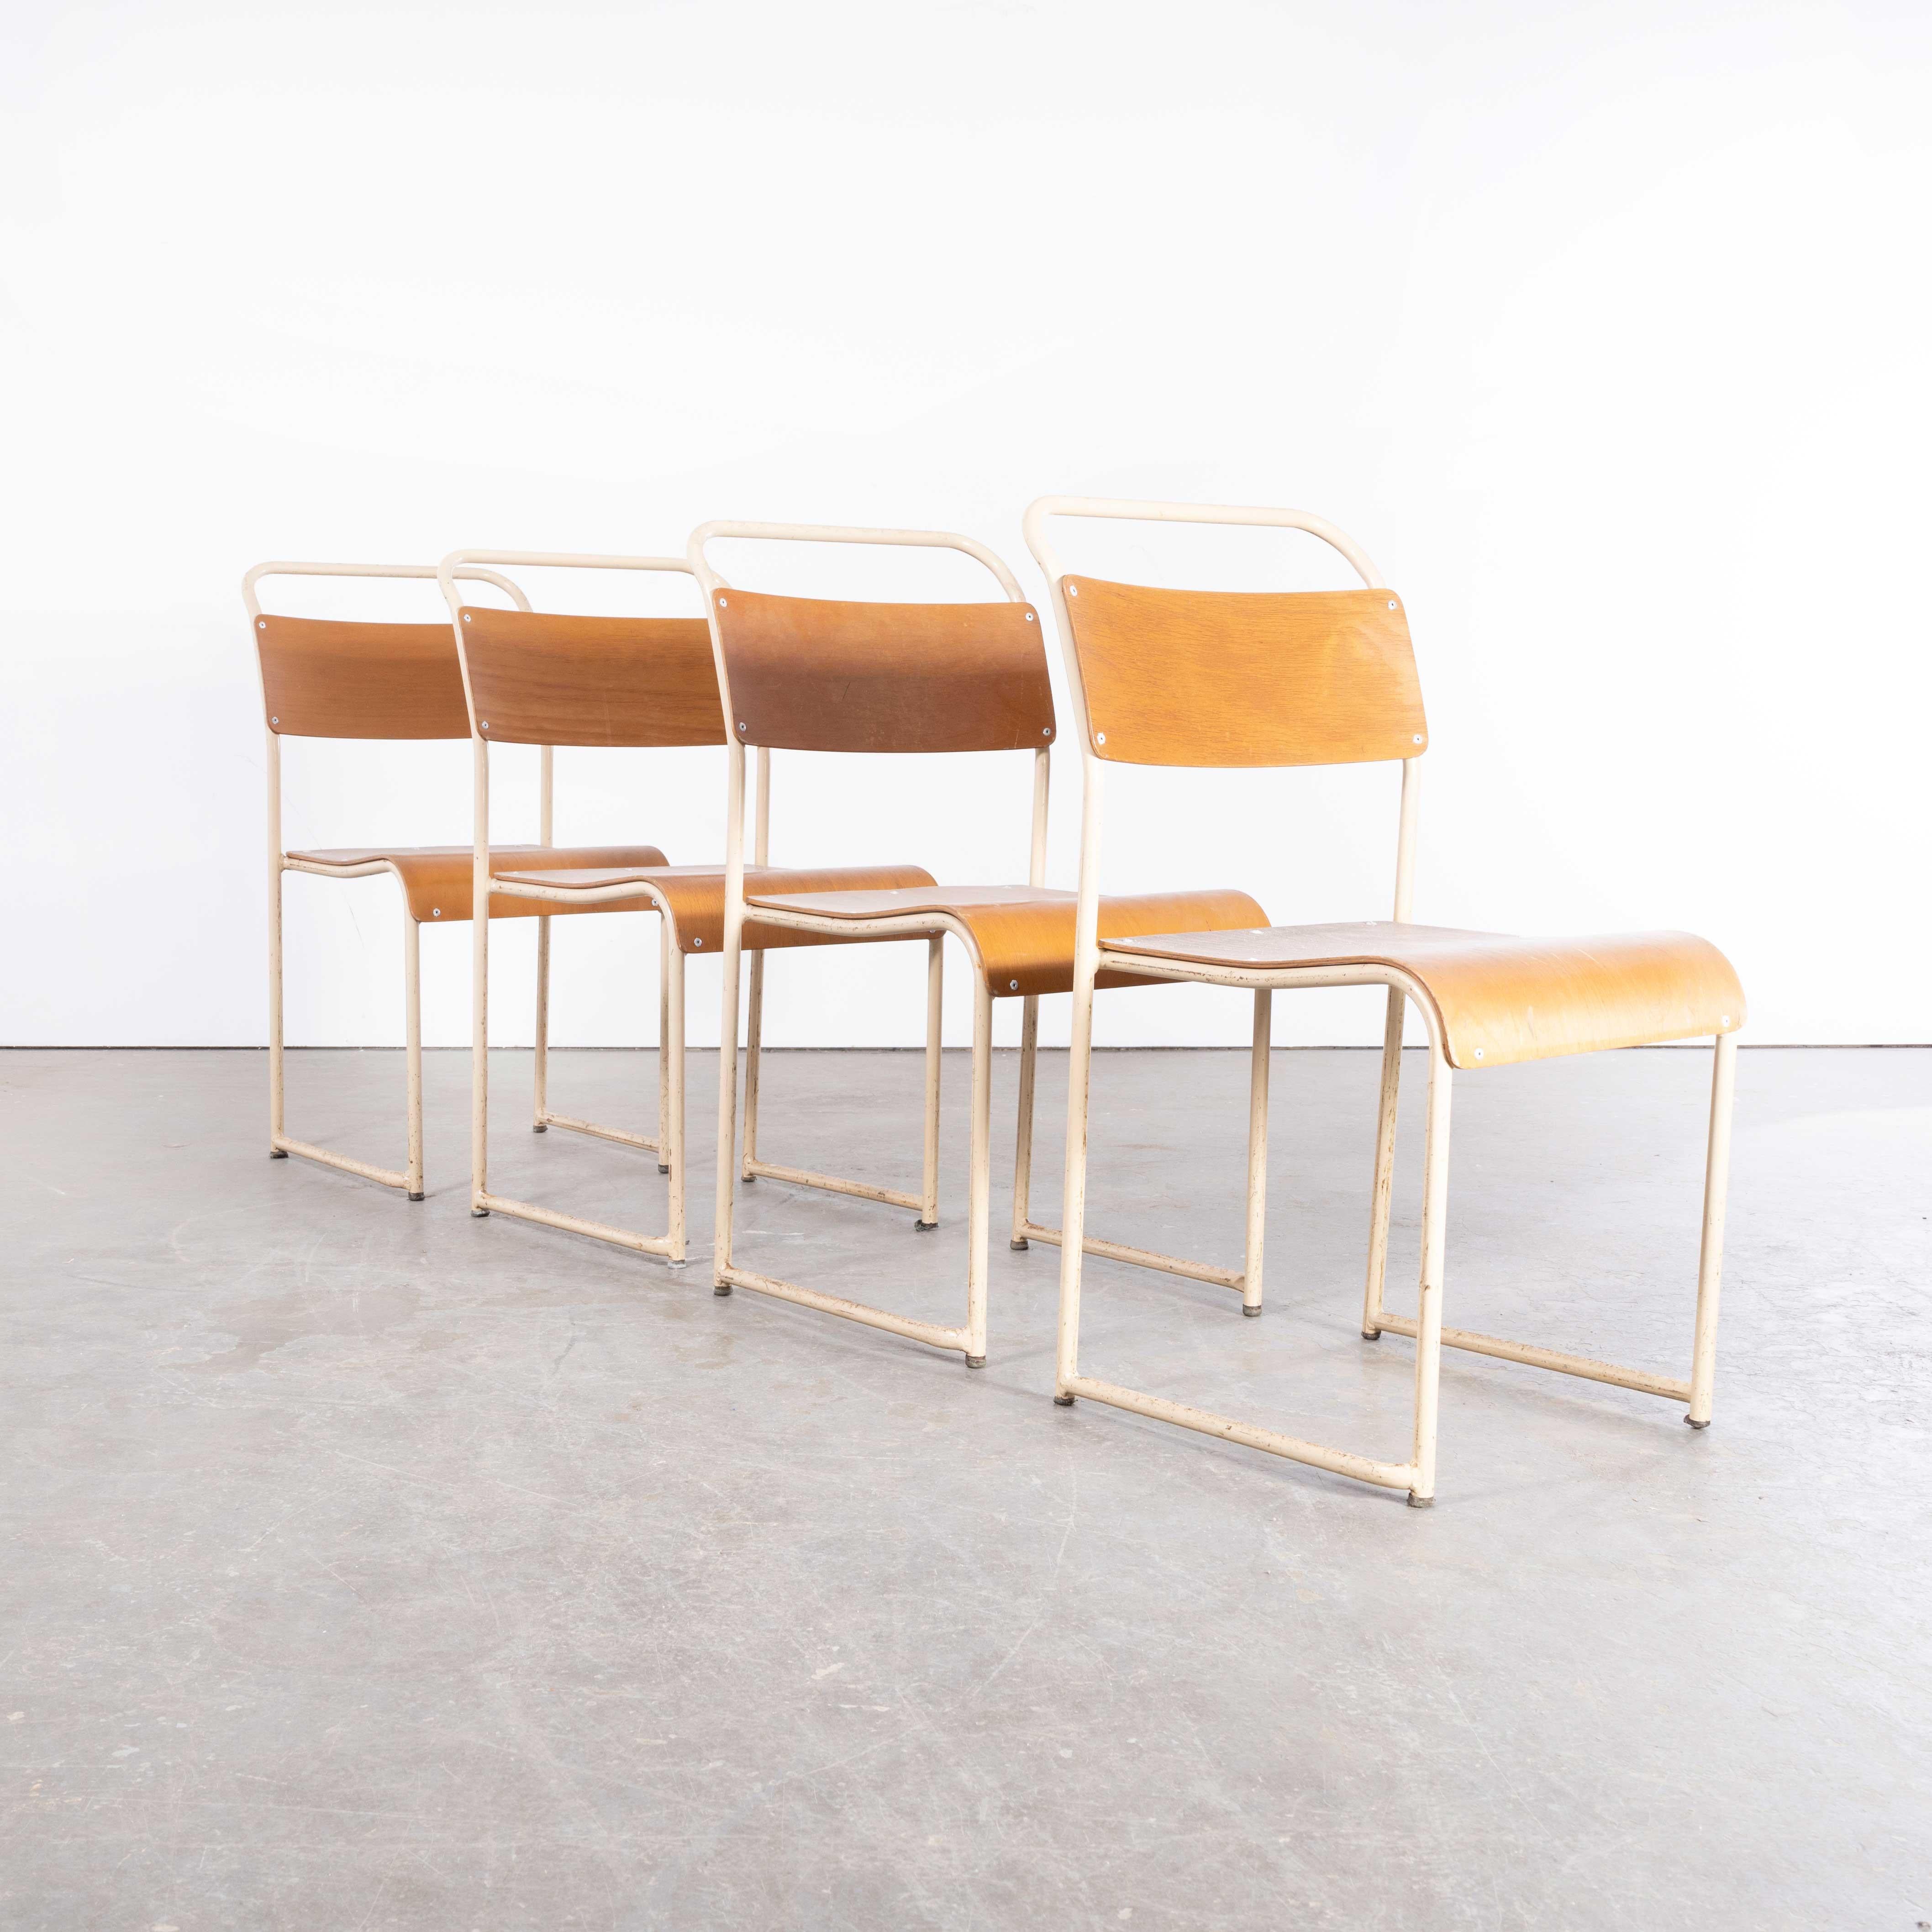 1950s Bamco Tubular Metal Cream Dining Chairs – Set Of Four
1950s Bamco Tubular Metal Cream Dining Chairs – Set Of Four. One of the all time Classic British chairs inspired by the contemporary designs of Bauhaus. The most famous producer in England